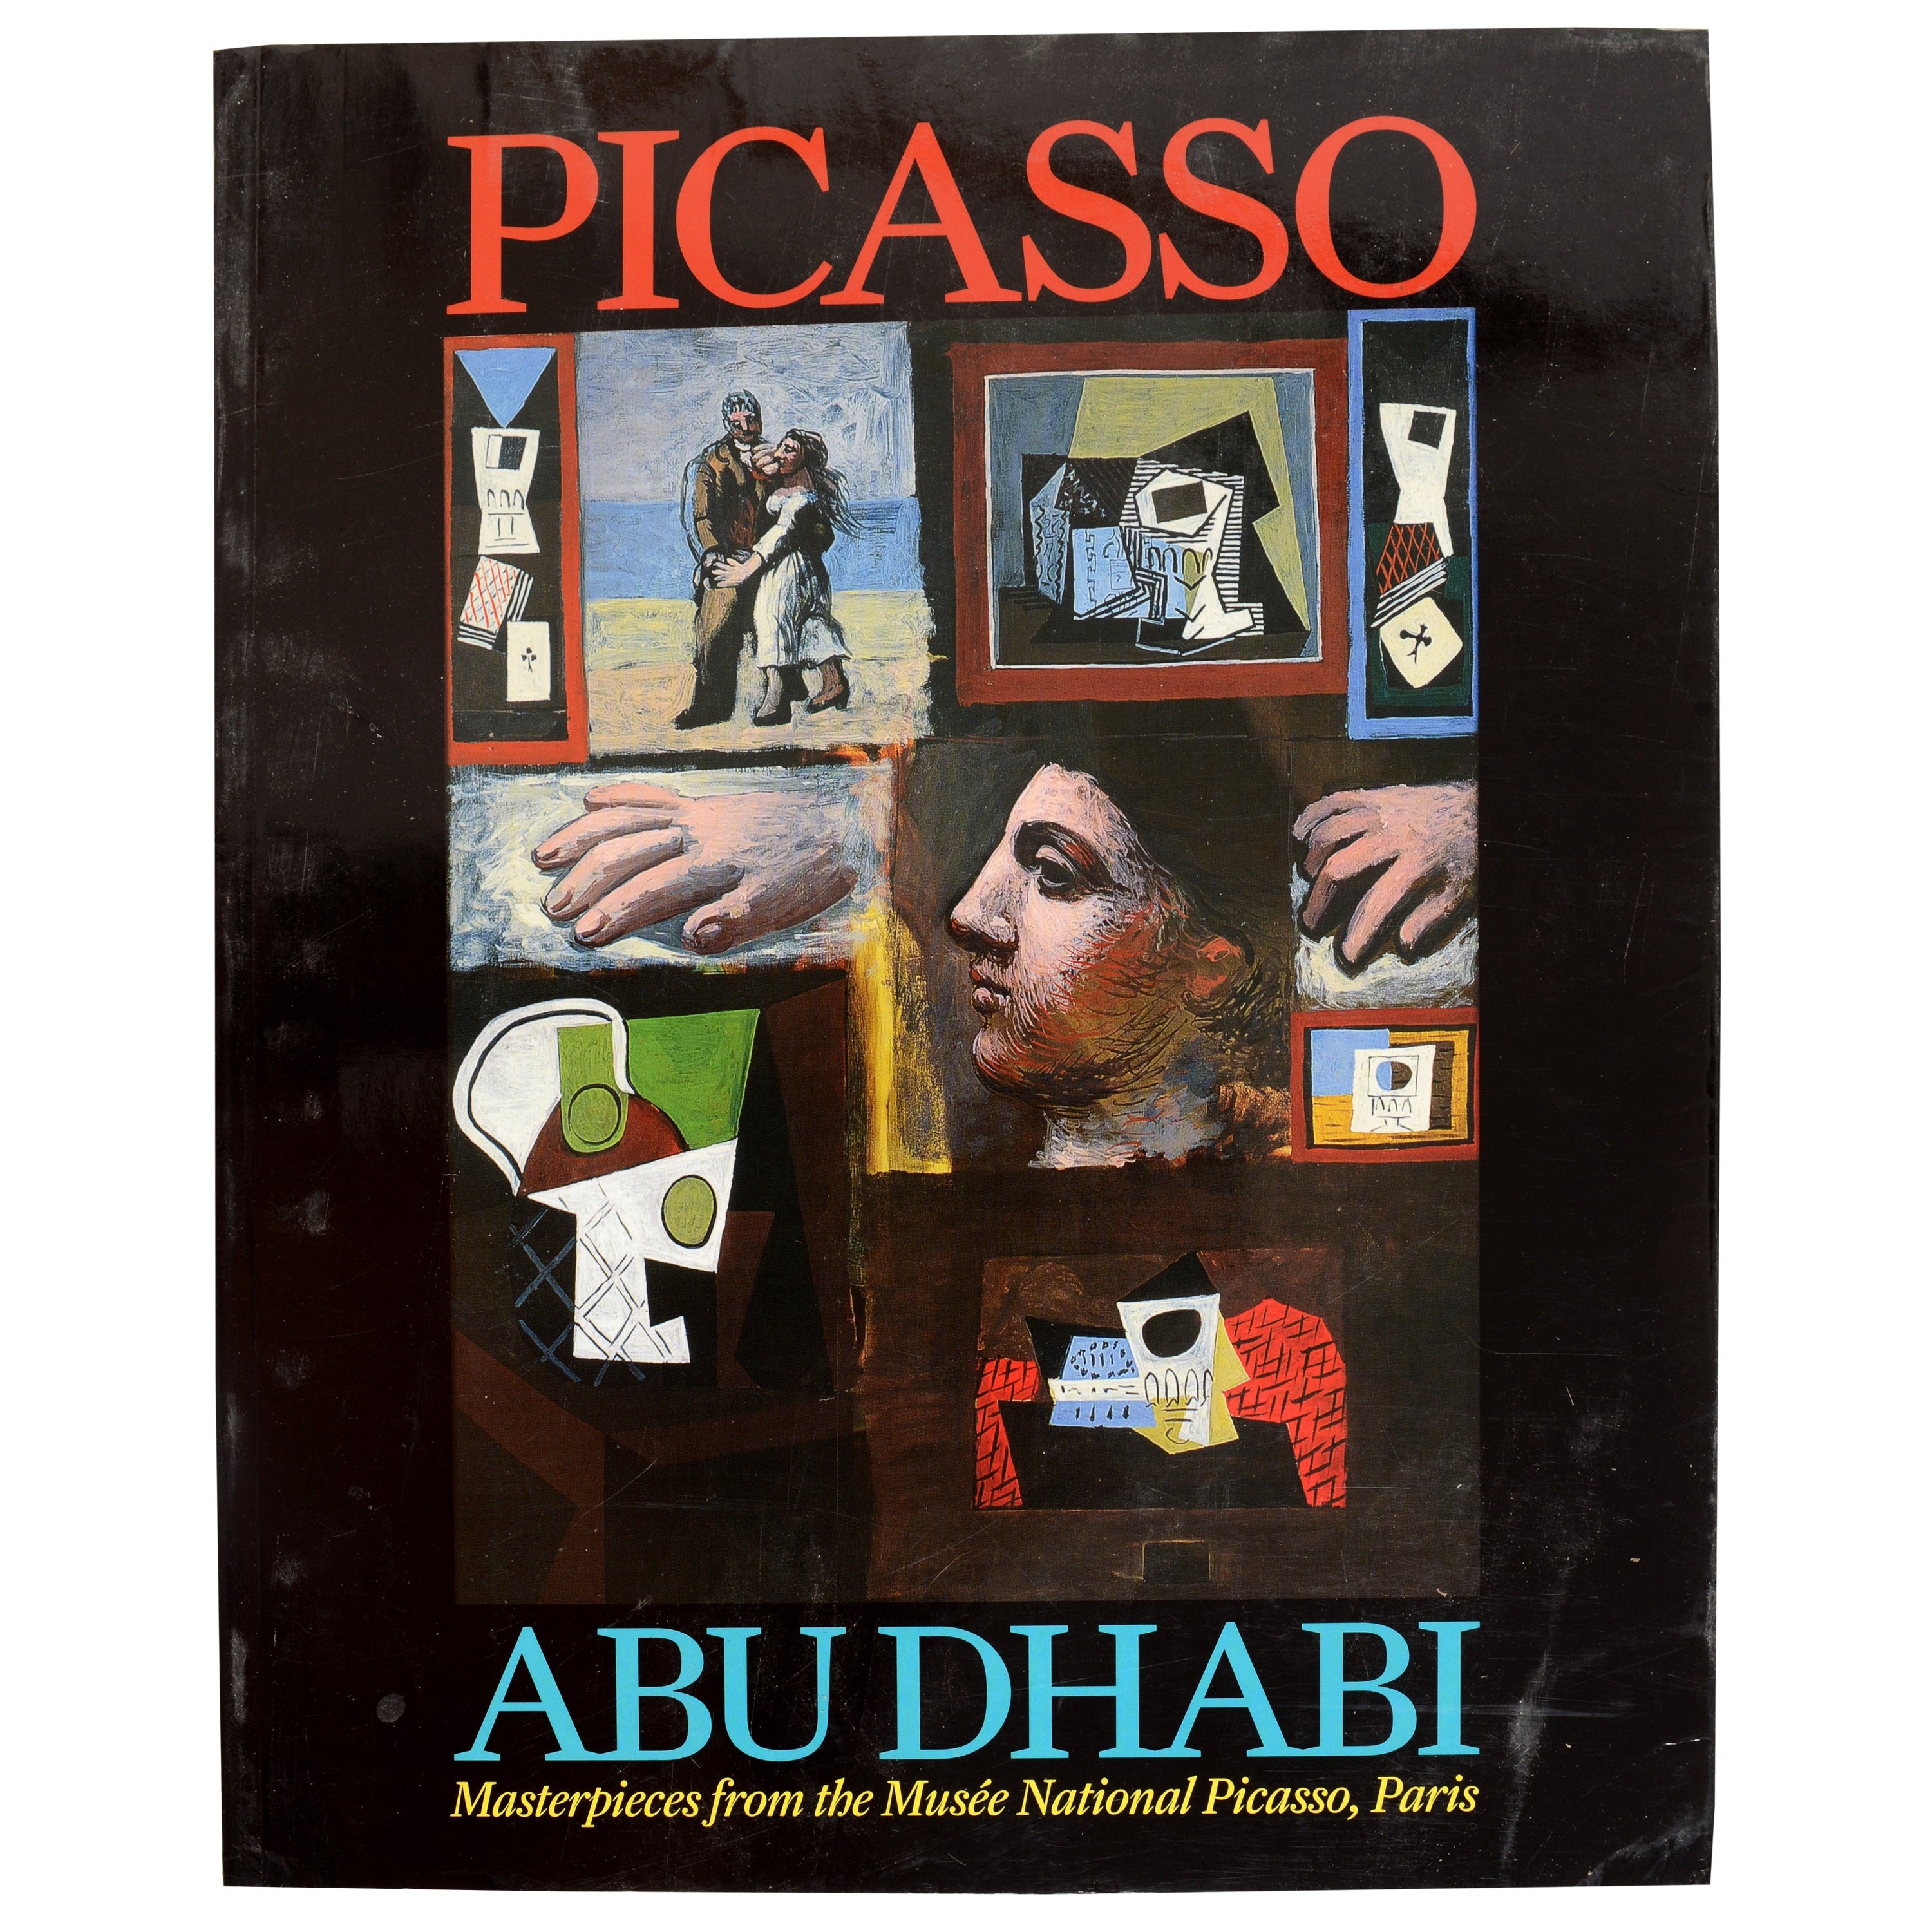 Picasso Abu Dhabi Masterpieces from the Musee National Picasso, Paris